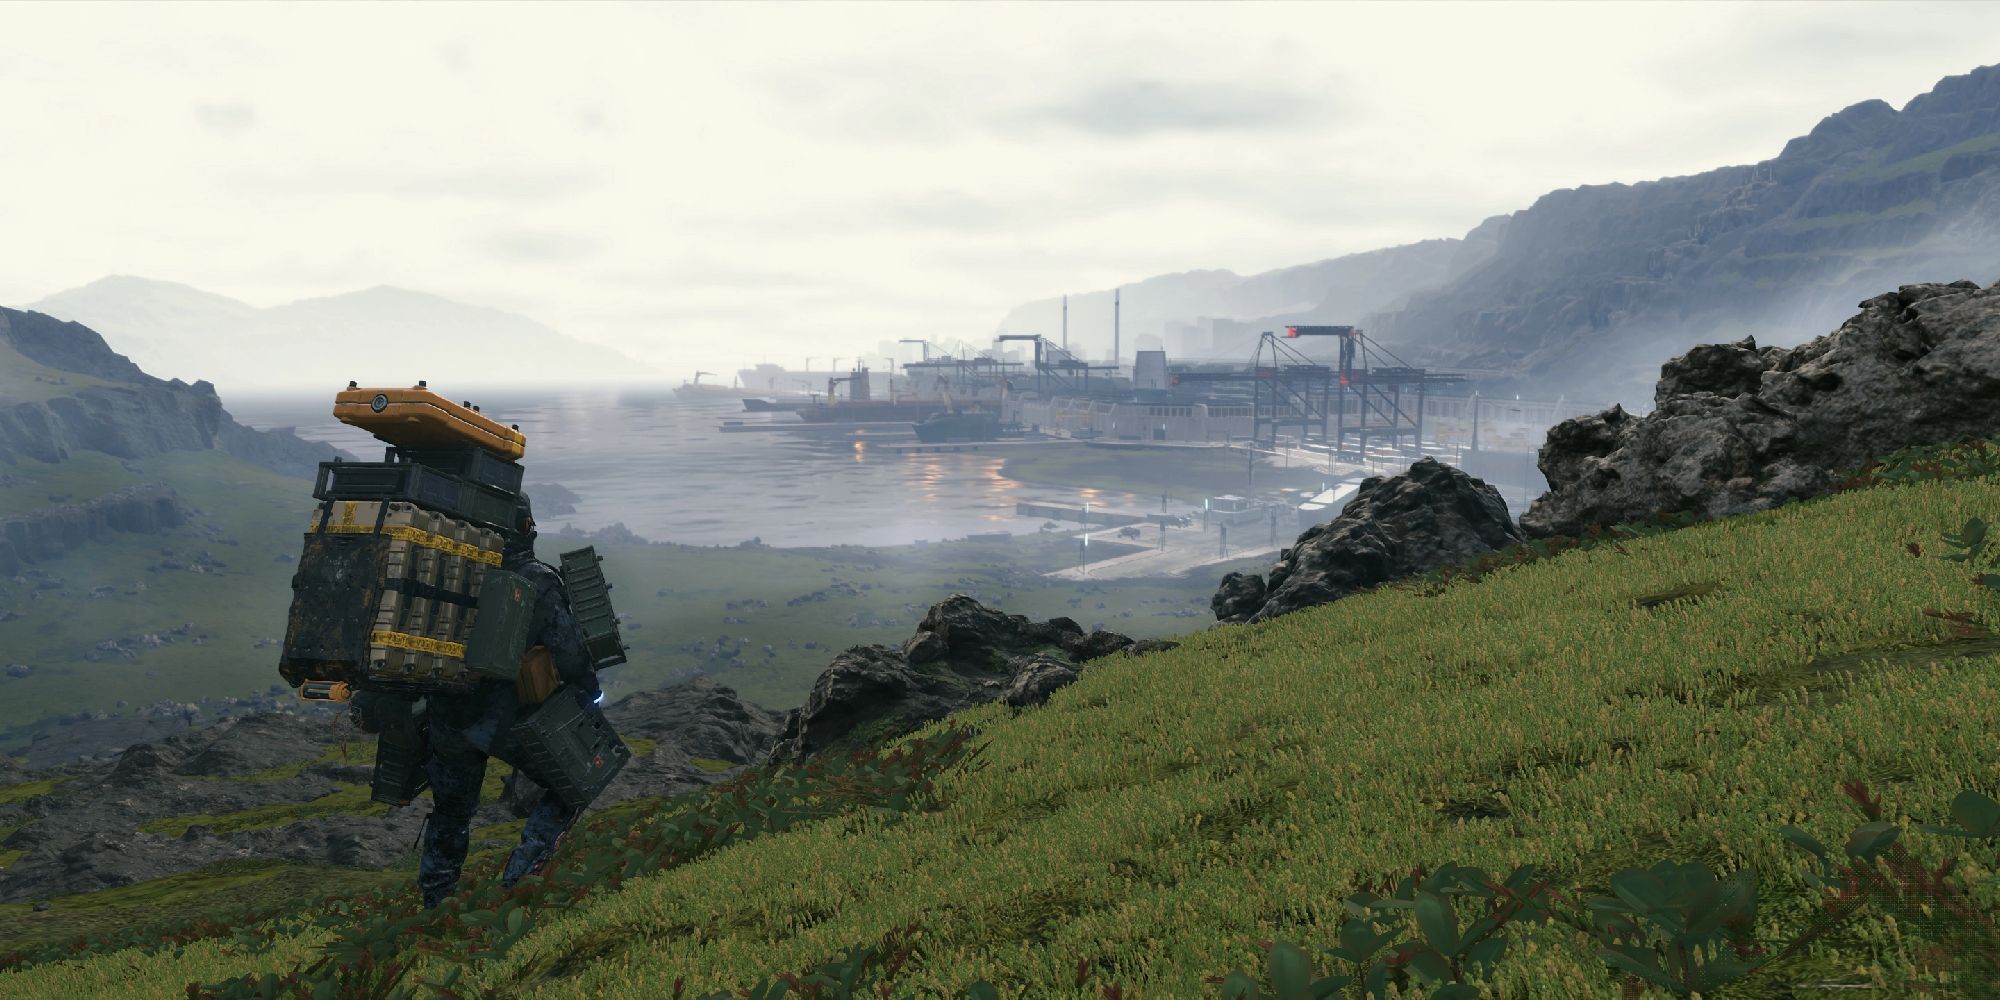 The protagonist stands on a grassy hill overlooking a structure in the distance in Death Stranding